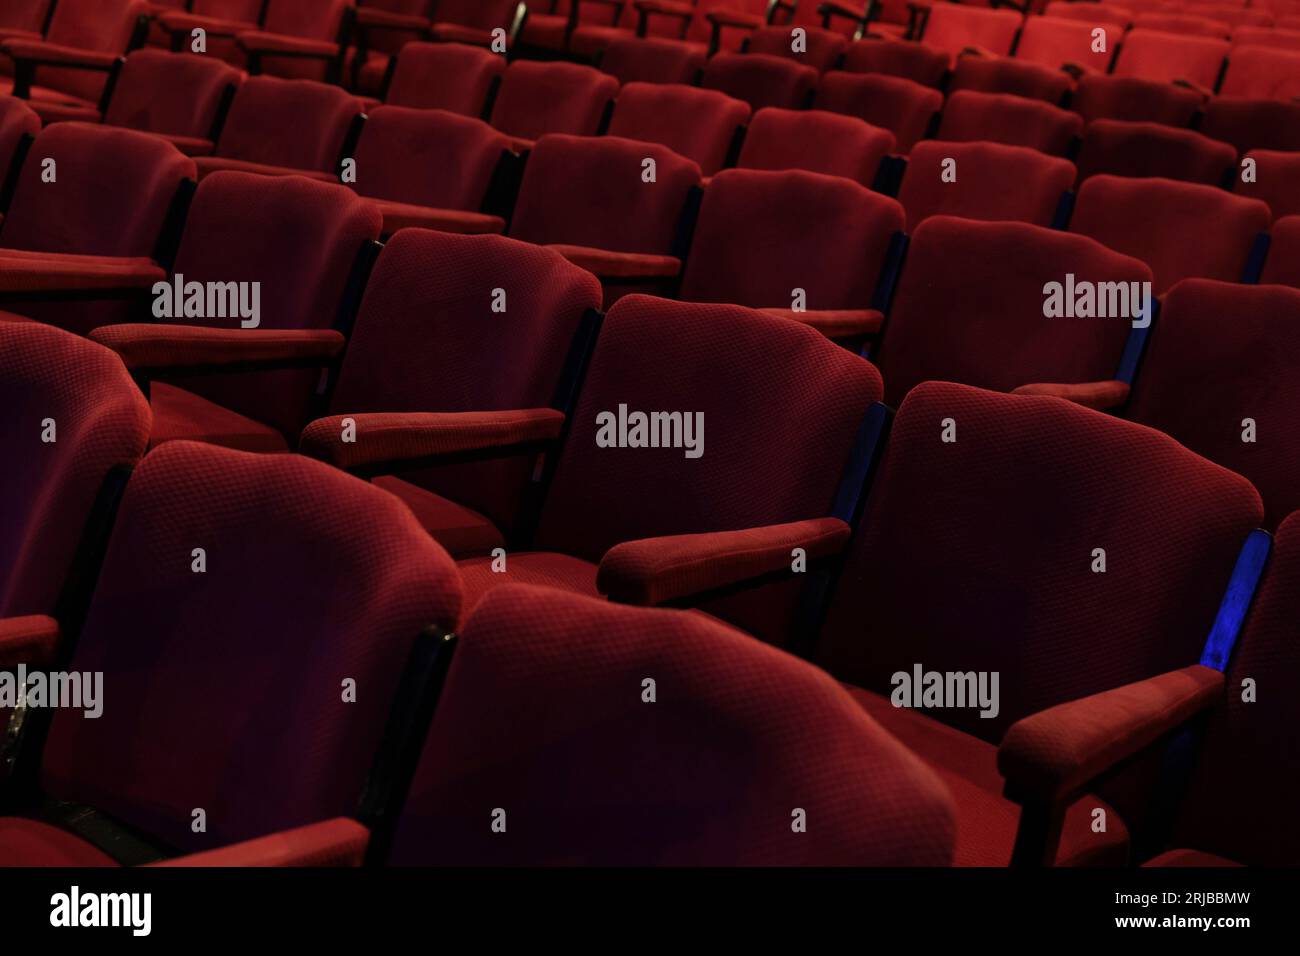 Empty rows of deep red fabric chairs or seats with arm rests in a theater or movie cinema hall. Stock Photo